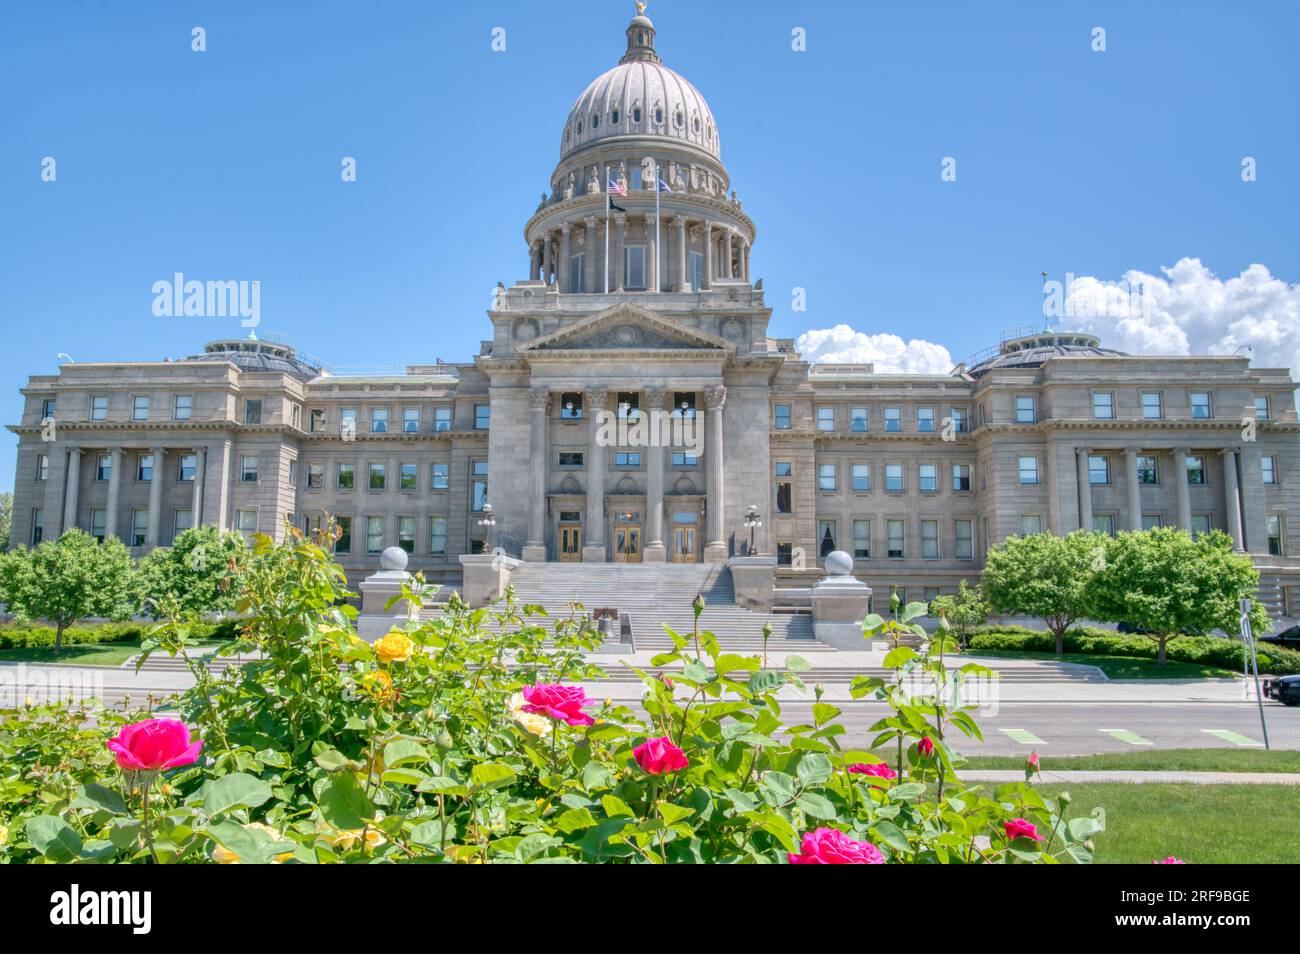 Exterior of the Idaho State Capitol Building in downtown capital city of Boise, Idaho Stock Photo